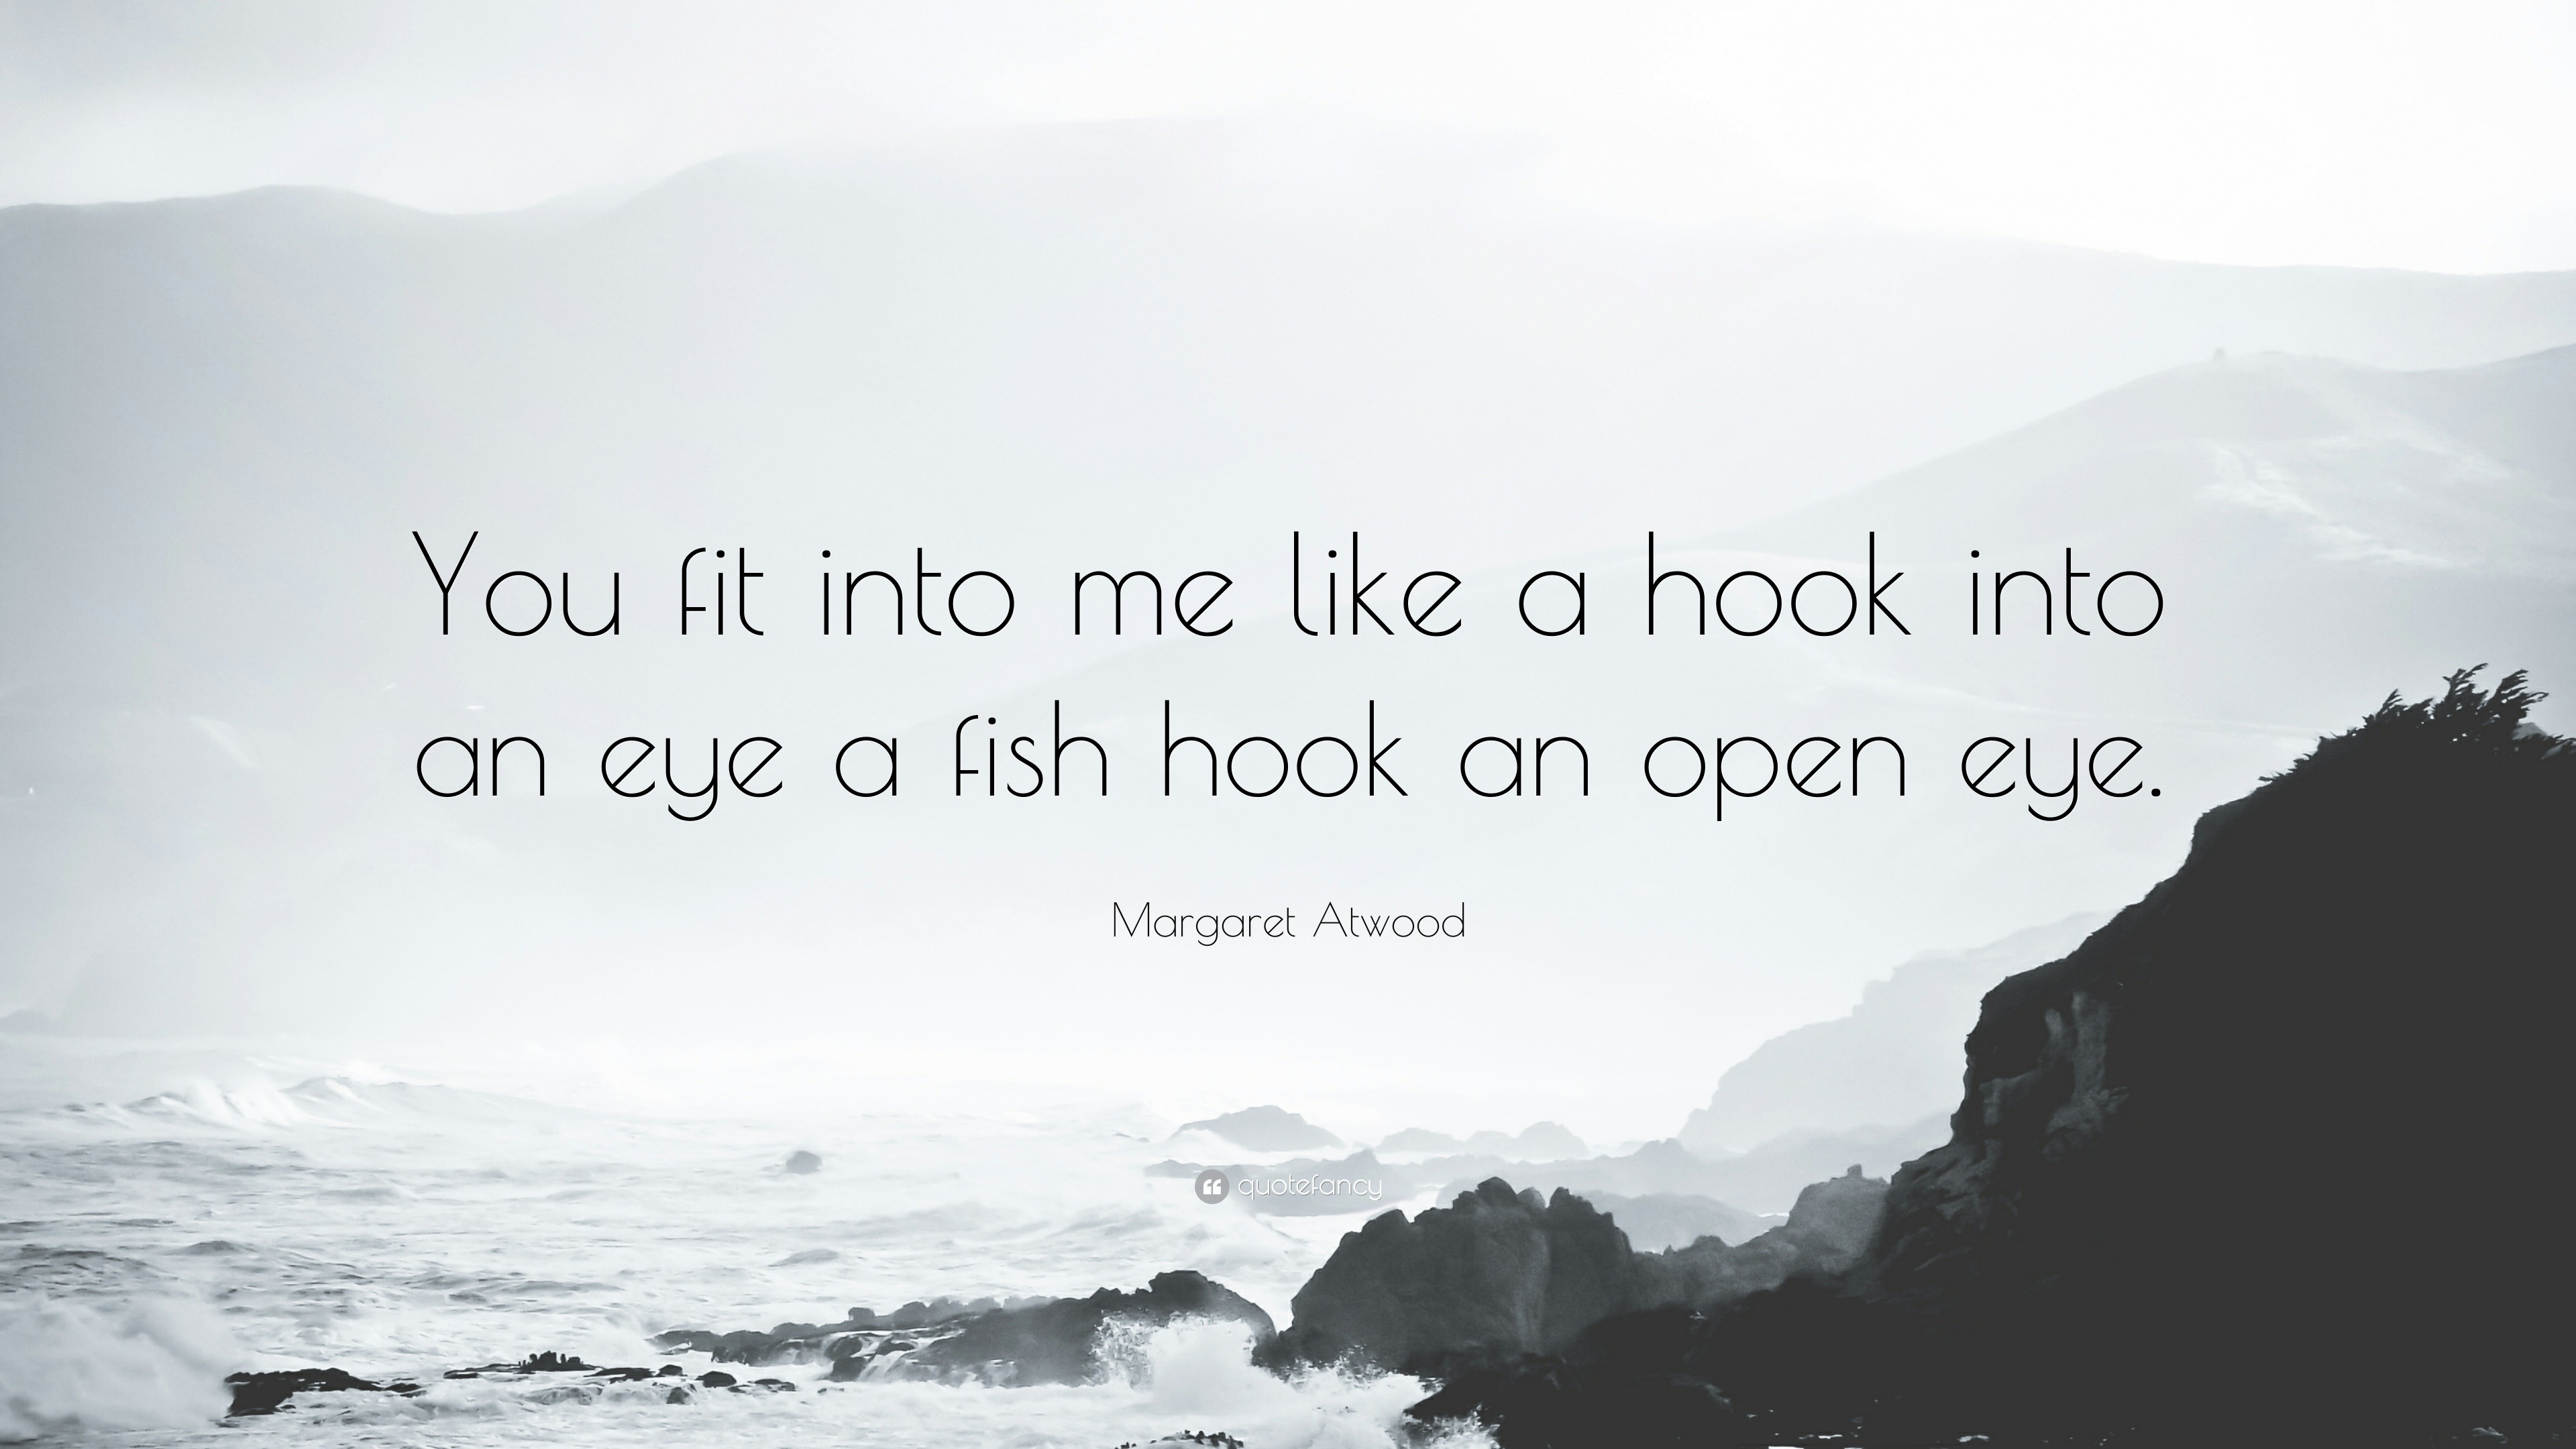 https://quotefancy.com/media/wallpaper/3840x2160/255859-Margaret-Atwood-Quote-You-fit-into-me-like-a-hook-into-an-eye-a.jpg